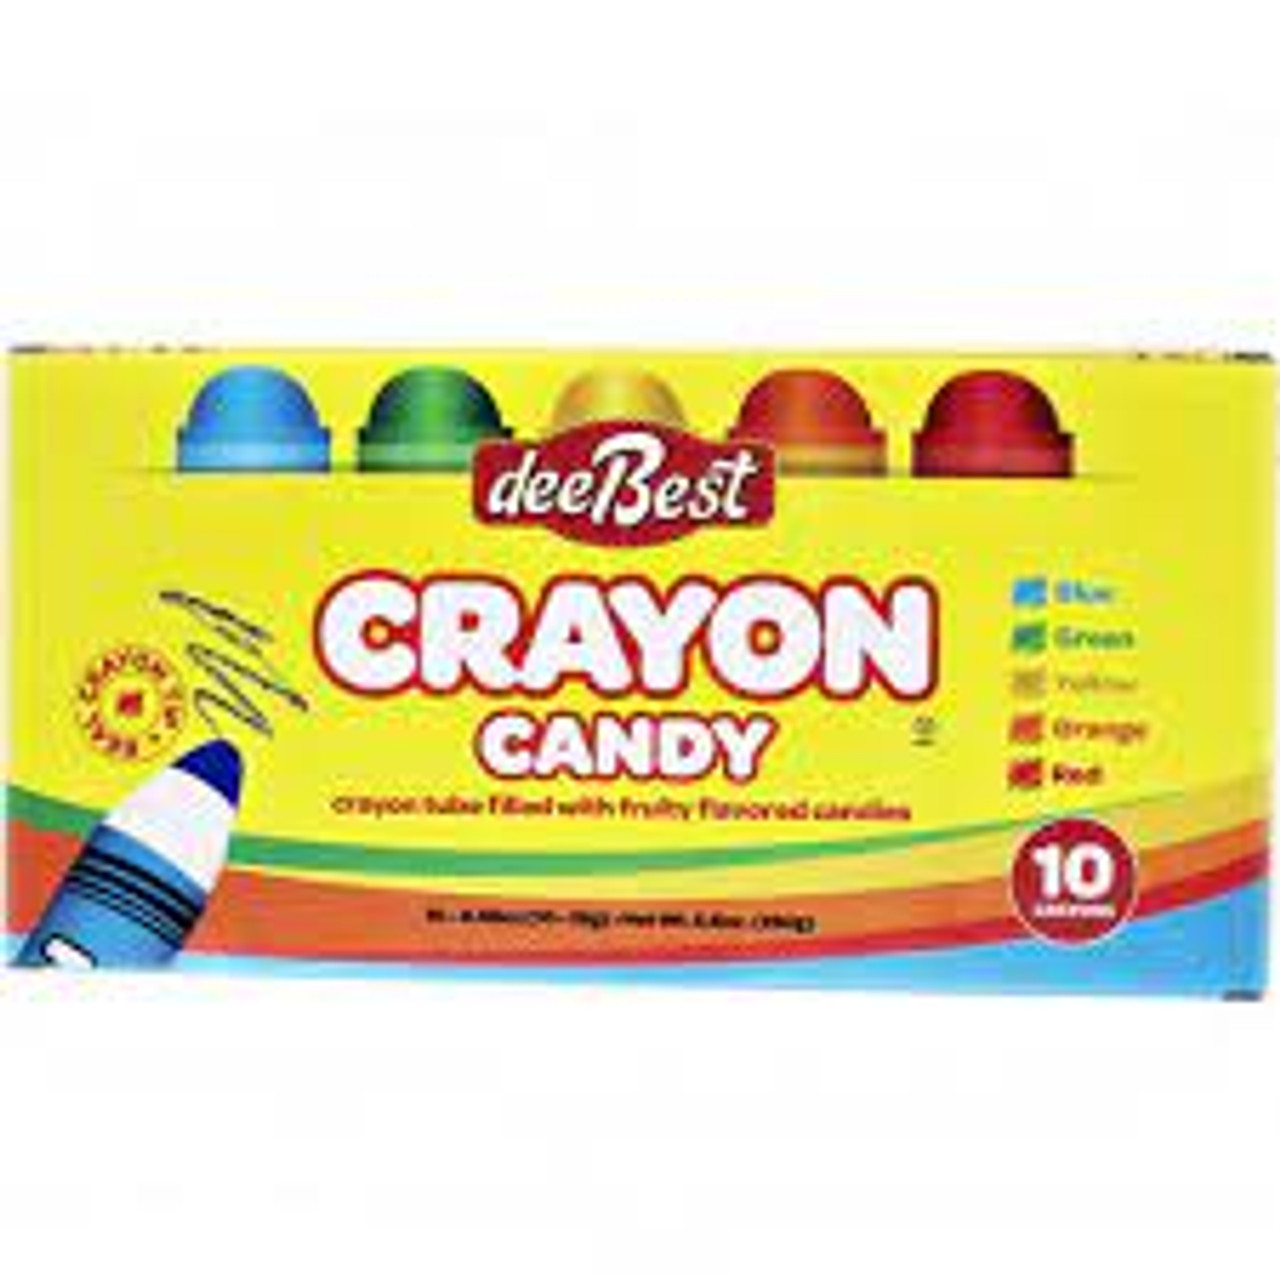 Dee Best Back To School Crayon Tube Filled with Fruity Flavored Candy - 5  Crayons